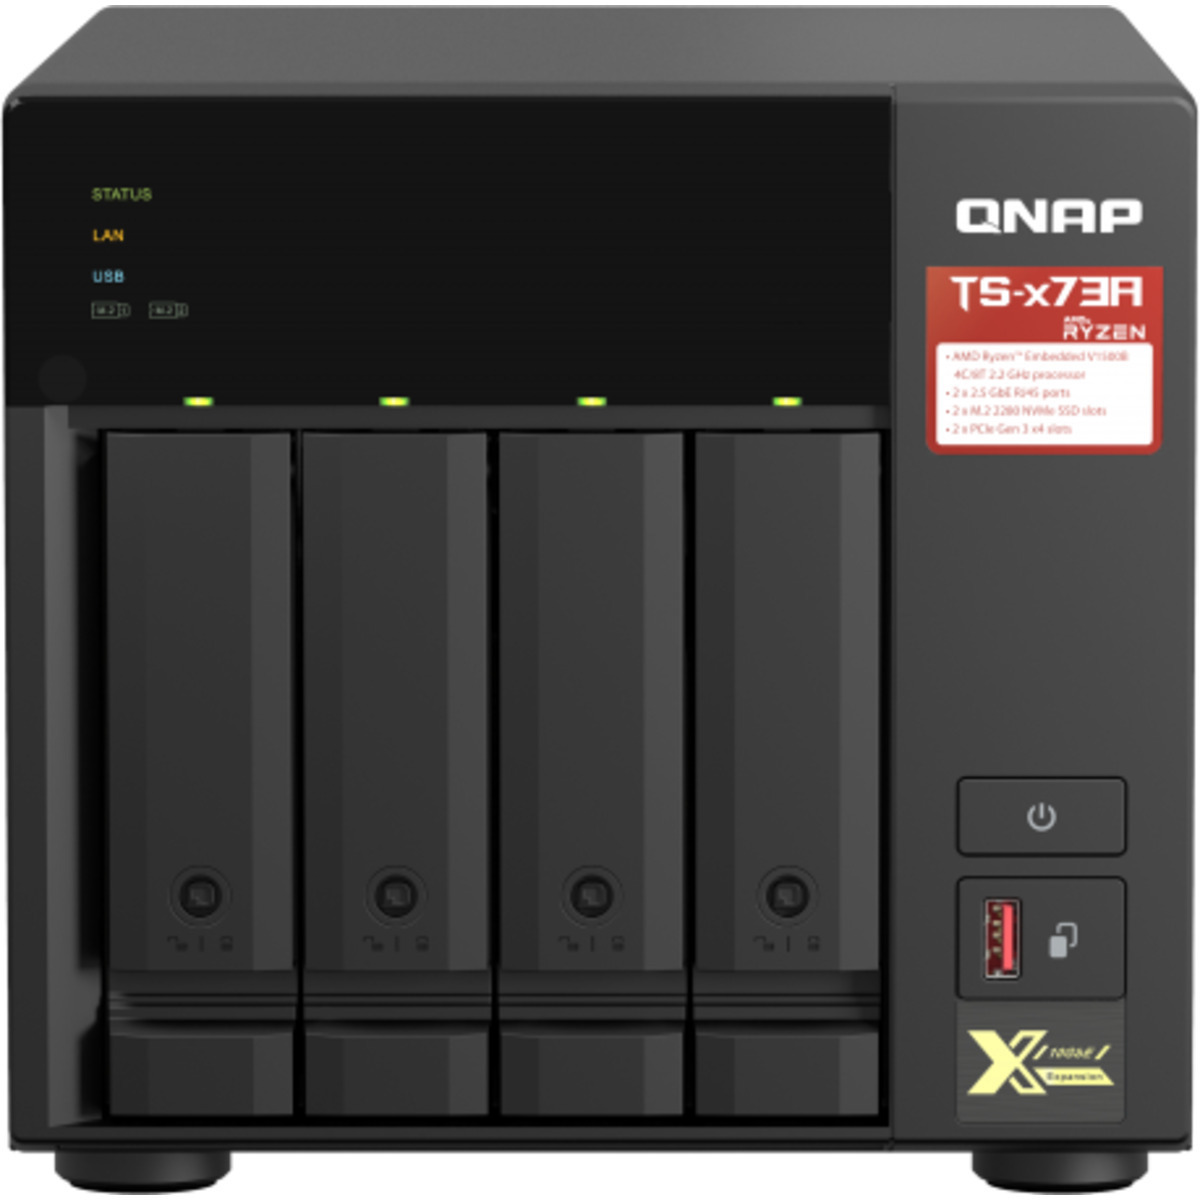 QNAP TS-473A 56tb 4-Bay Desktop Multimedia / Power User / Business NAS - Network Attached Storage Device 4x14tb Seagate EXOS X18 ST14000NM000J 3.5 7200rpm SATA 6Gb/s HDD ENTERPRISE Class Drives Installed - Burn-In Tested TS-473A